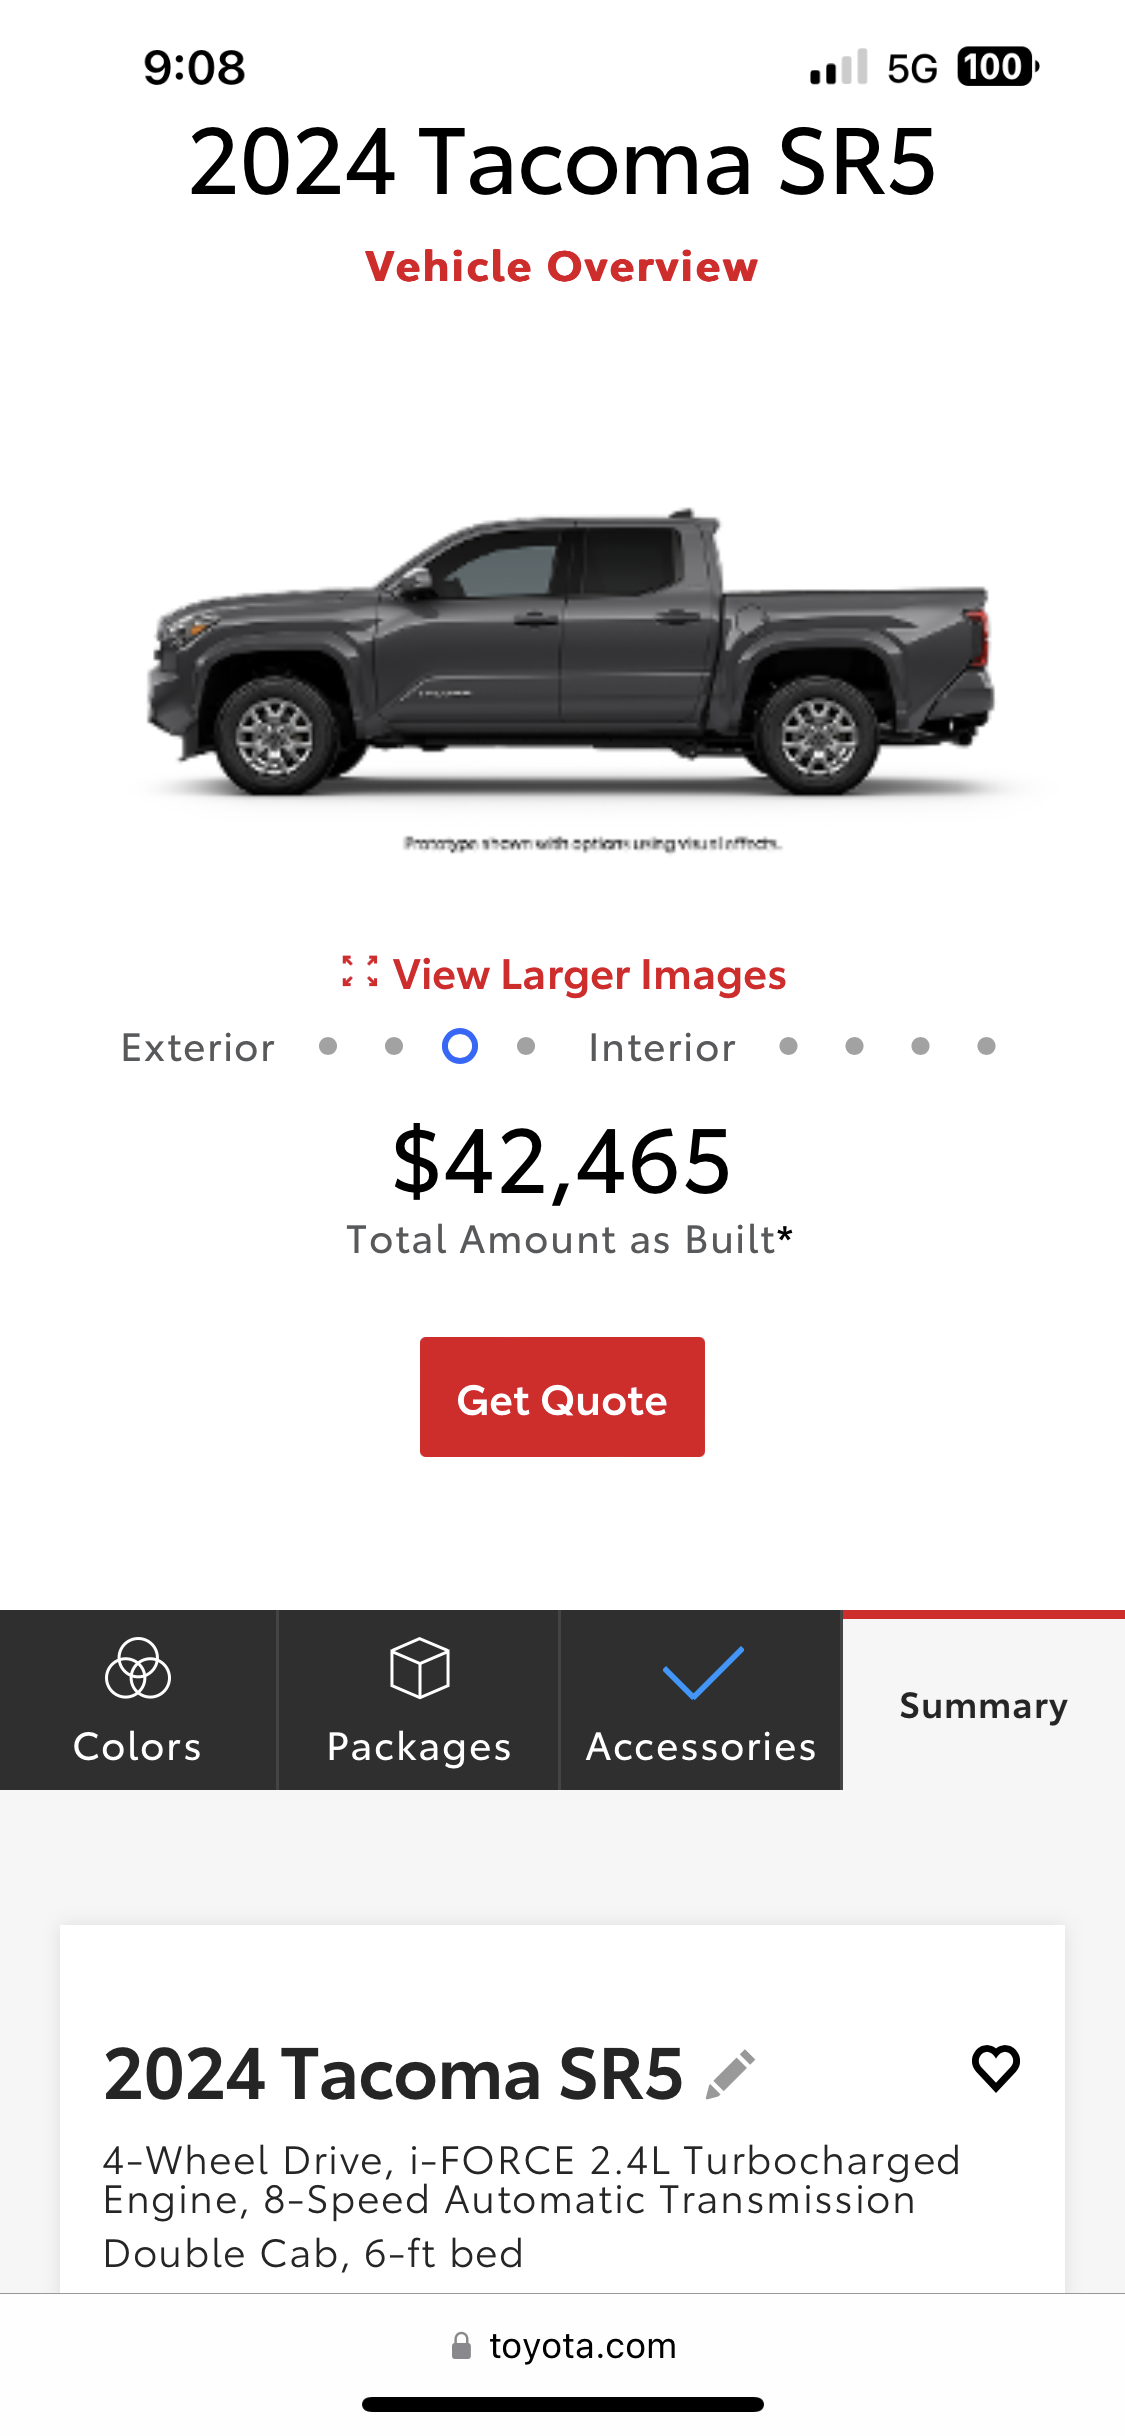 2024 Tacoma 2024 Tacoma Build and Price Configurator Now Live! - Post Up Your Builds!! CFC2990A-4132-46BD-976A-0152E518296B